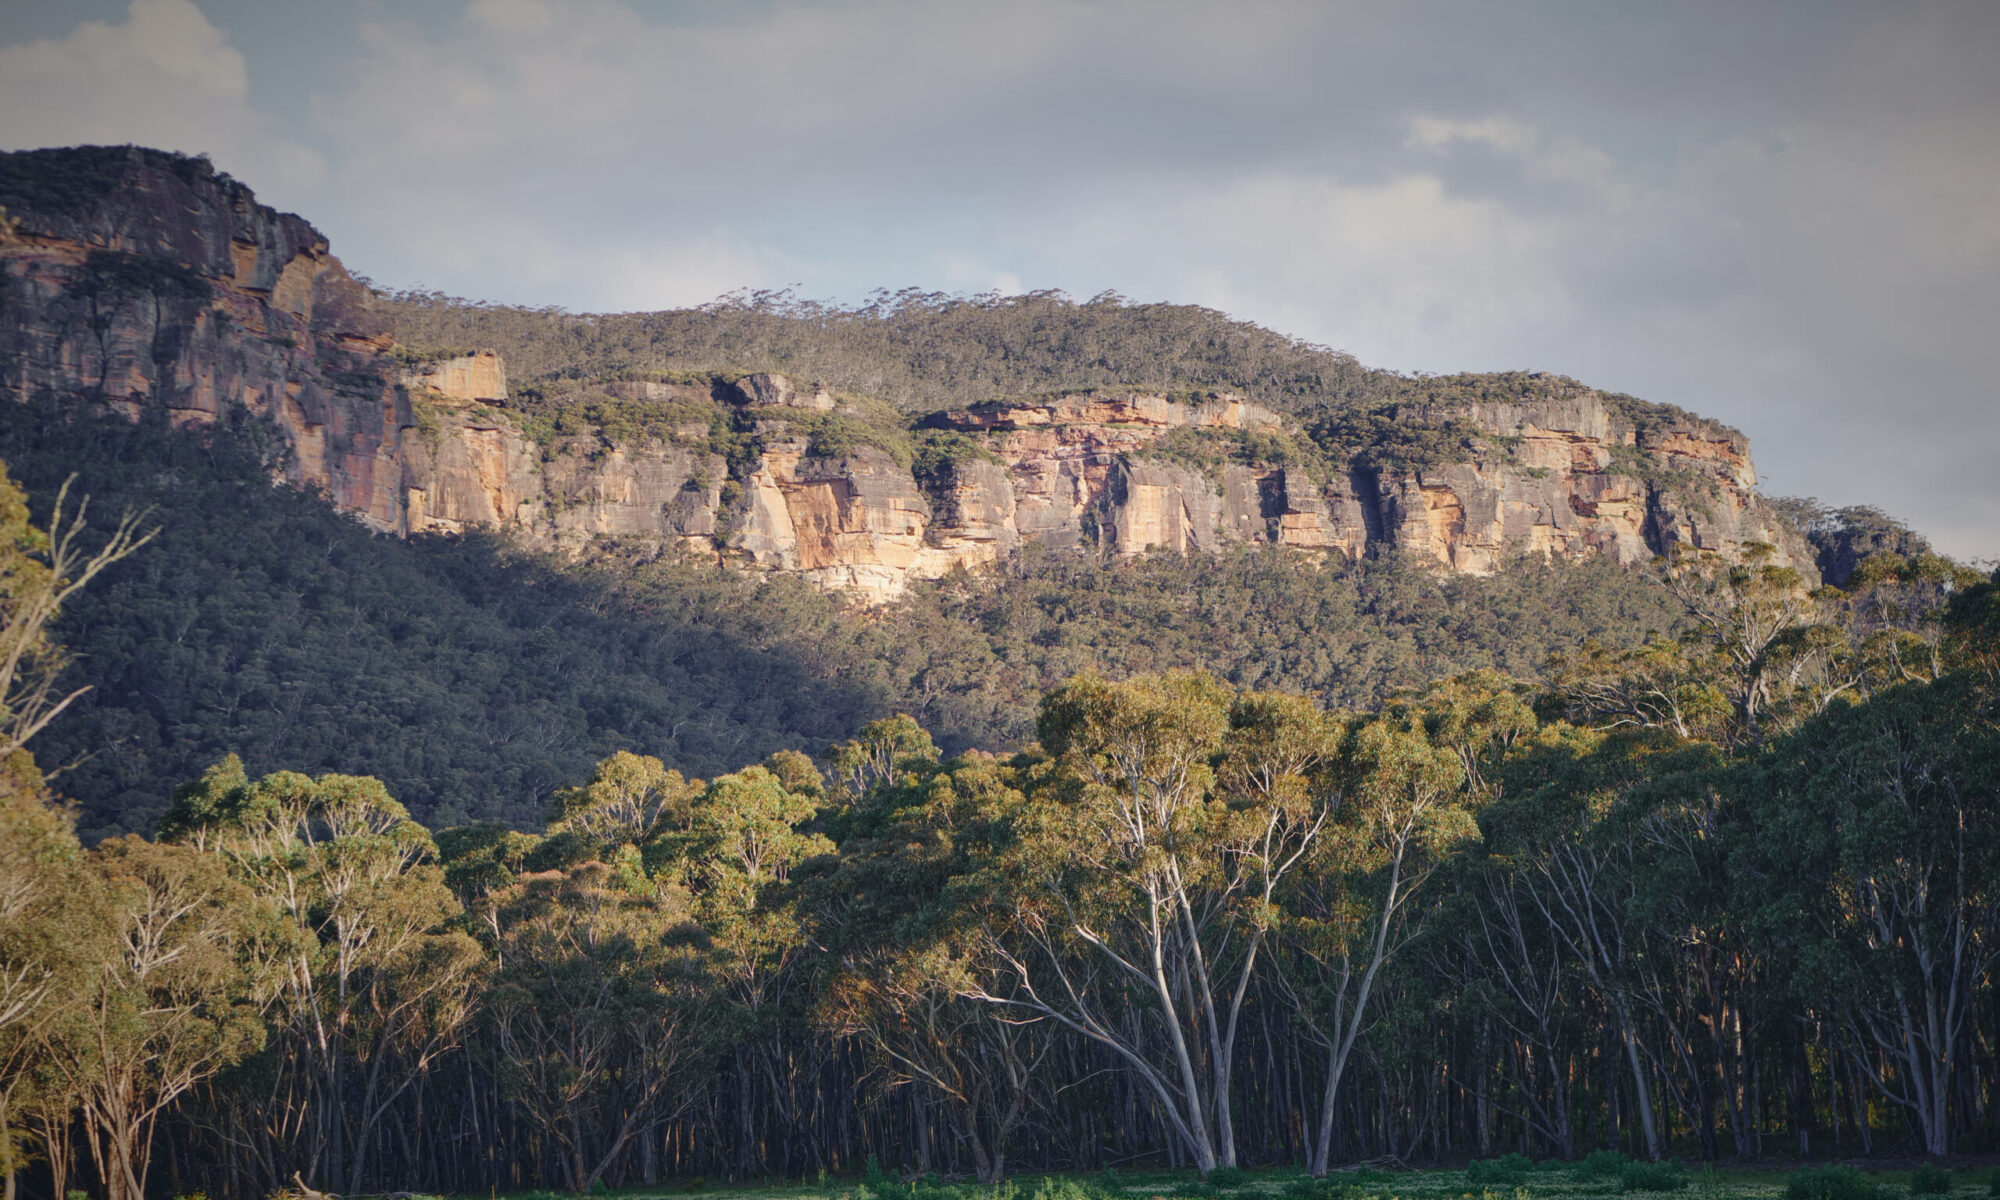 A scenic view of the lush, forested landscape of the Blue Mountains with towering sandstone cliffs under a softly lit sky, highlighting the natural beauty of this rugged terrain.